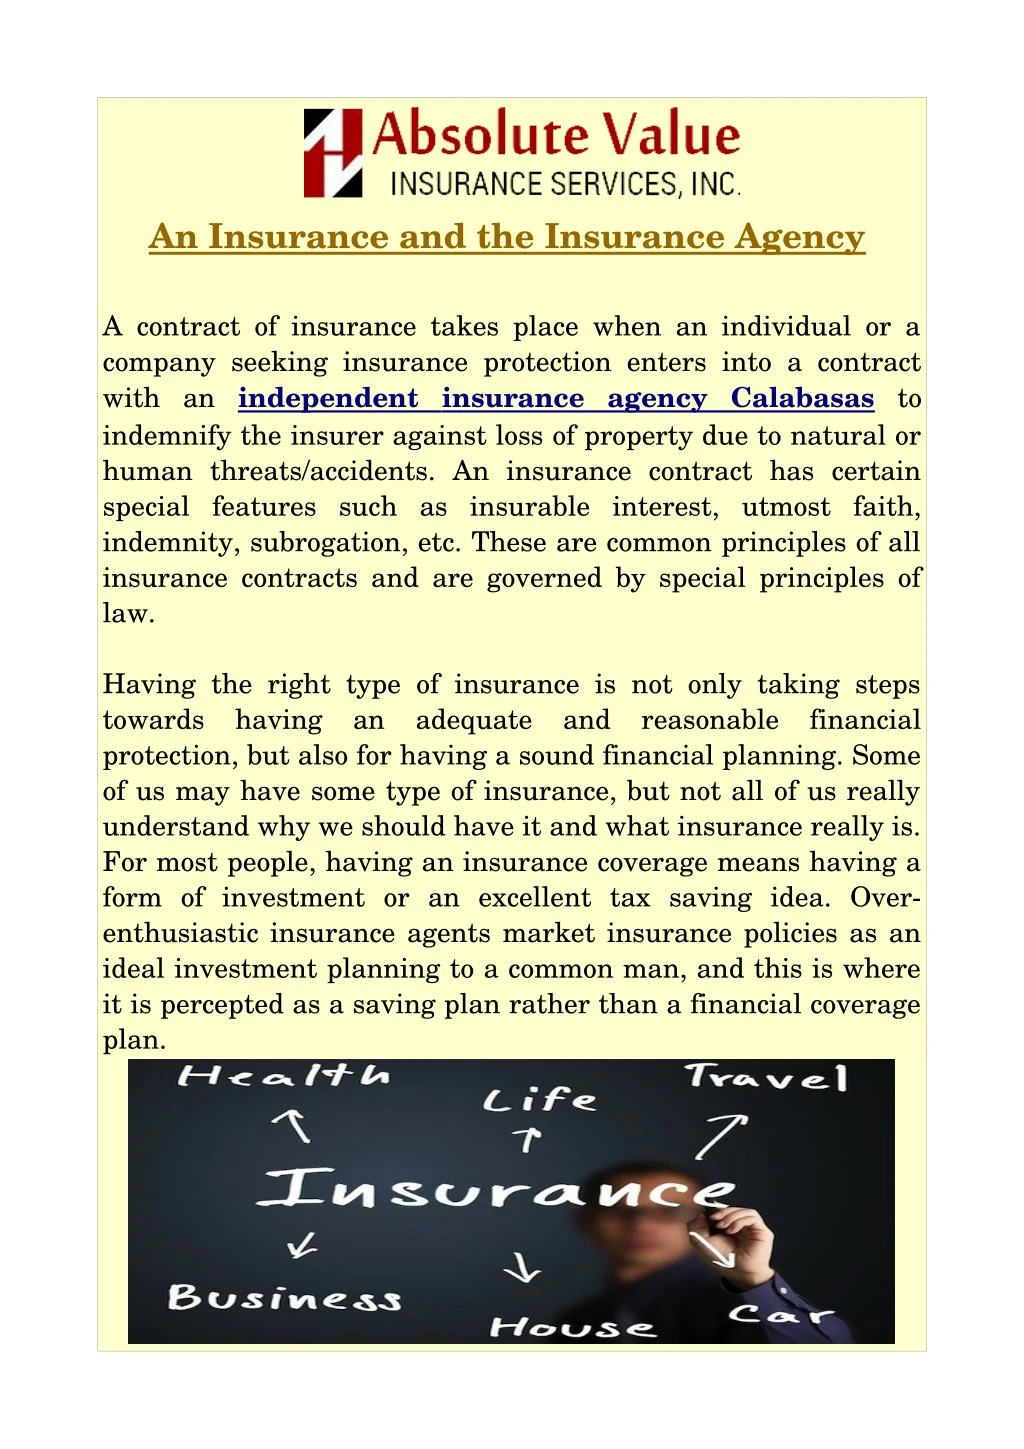 an insurance and the insurance agency